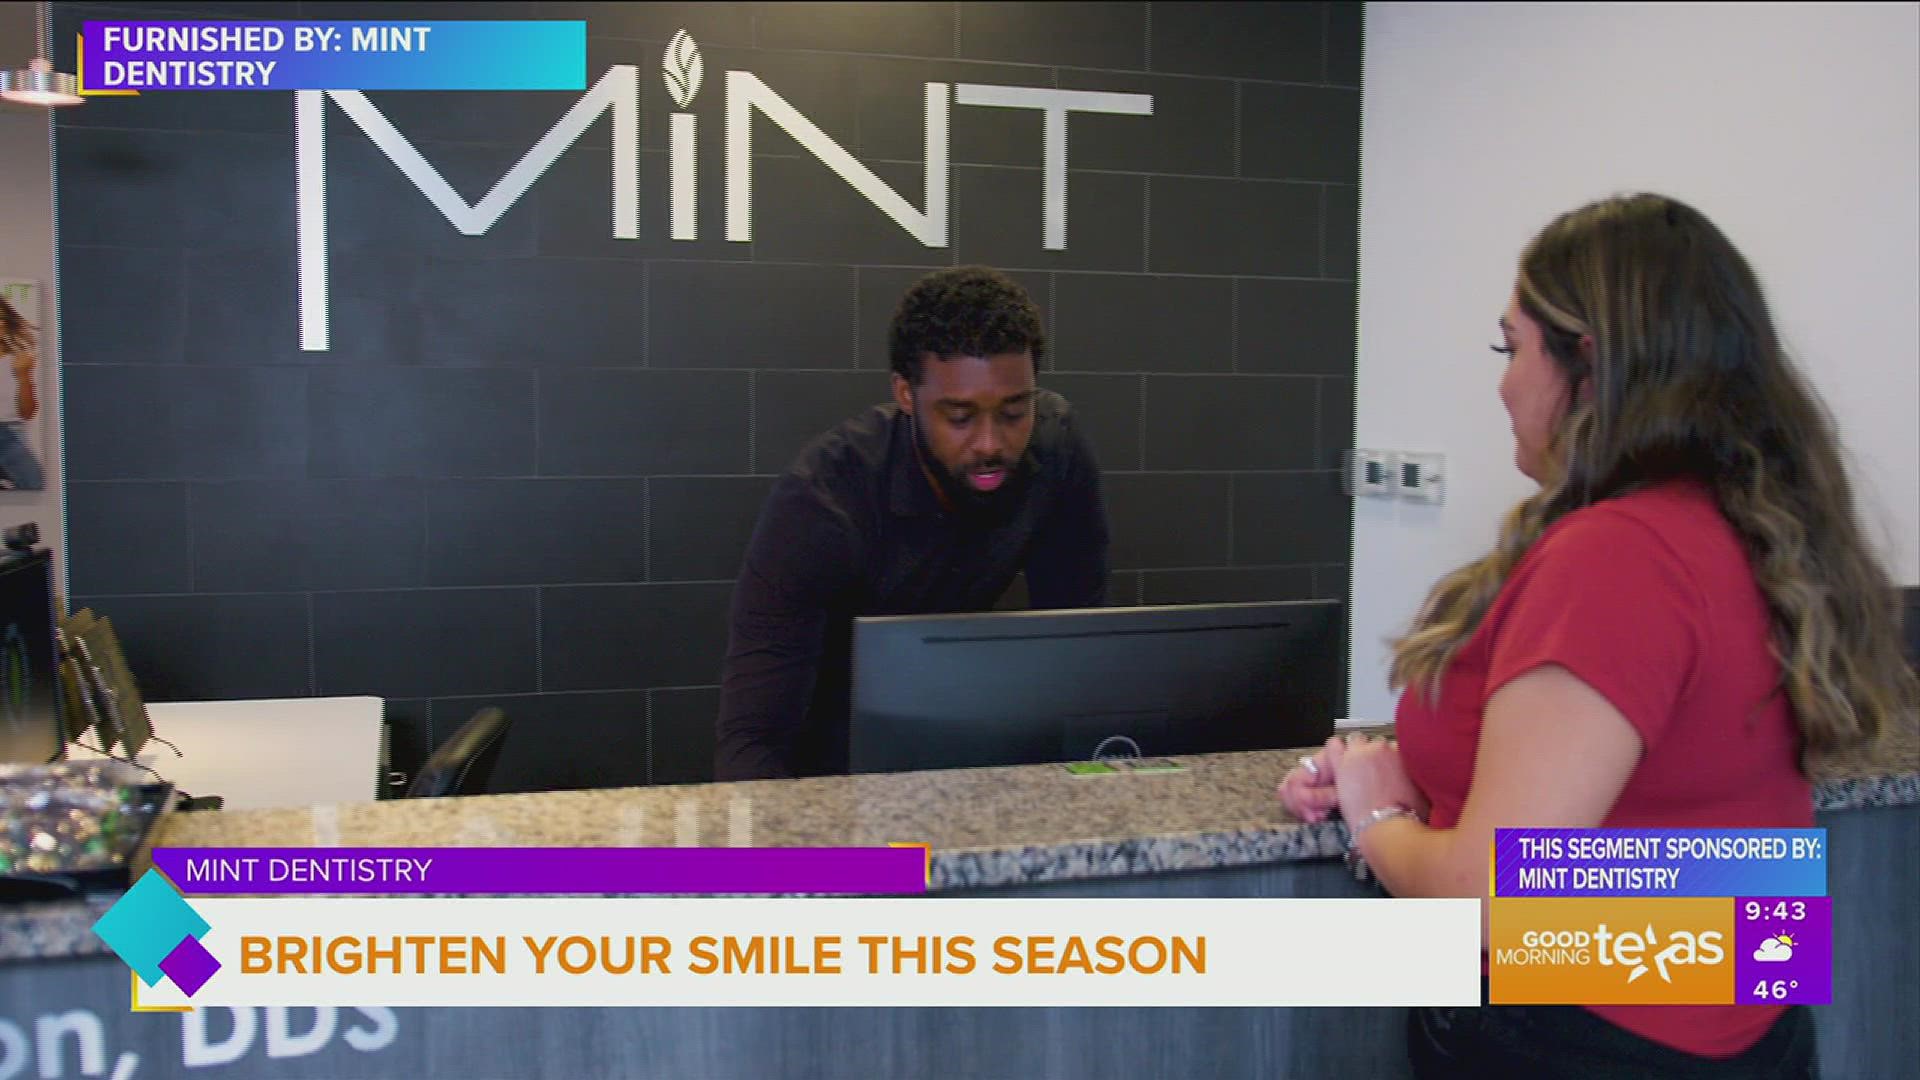 This segment is sponsored by Mint Dentistry.